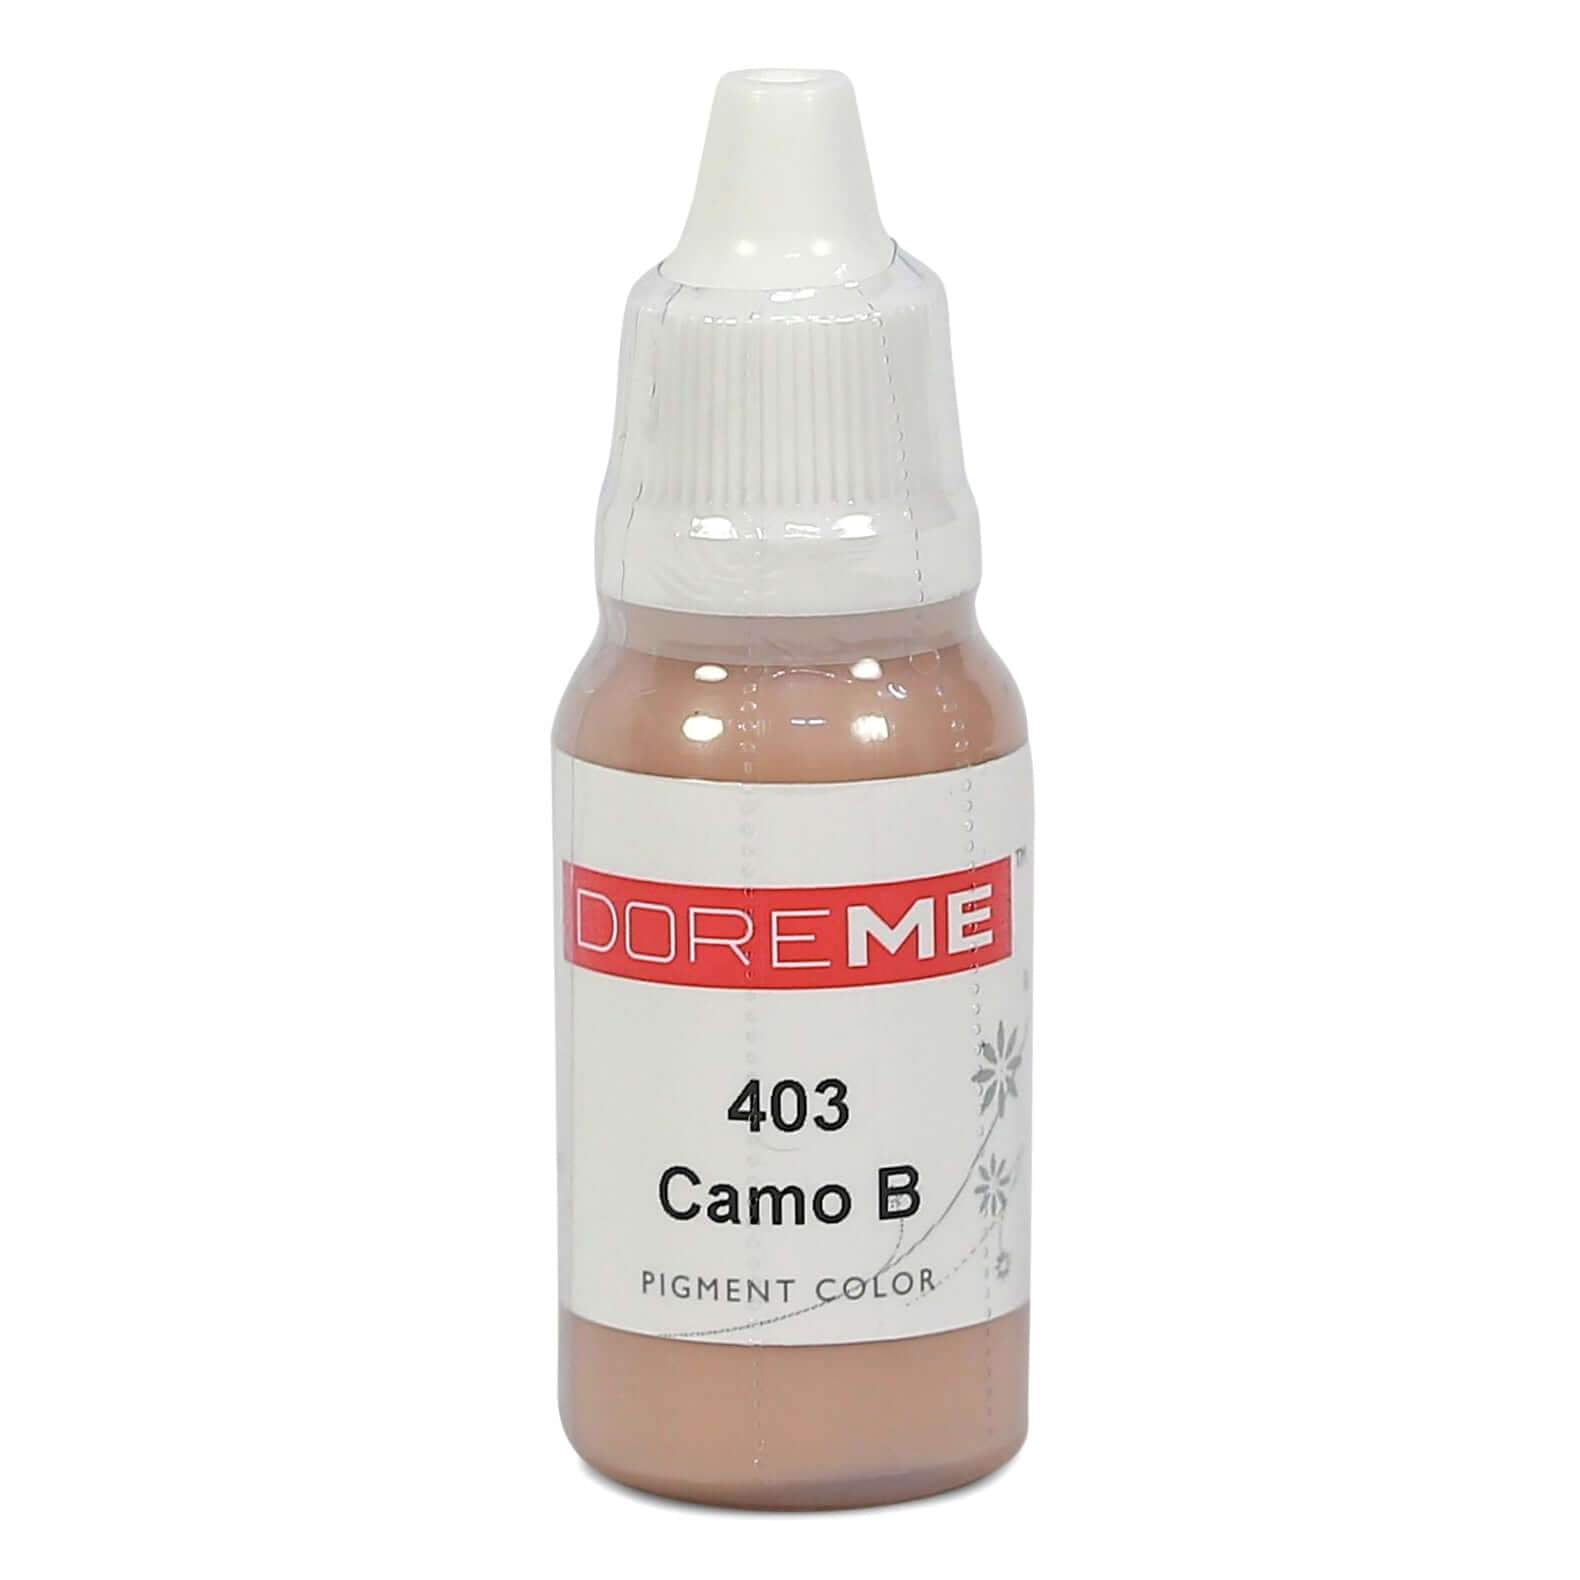 Doreme Skin Camouflage Pigments 403 Camo B (n) - Beautiful Ink UK trade and wholesale supplier